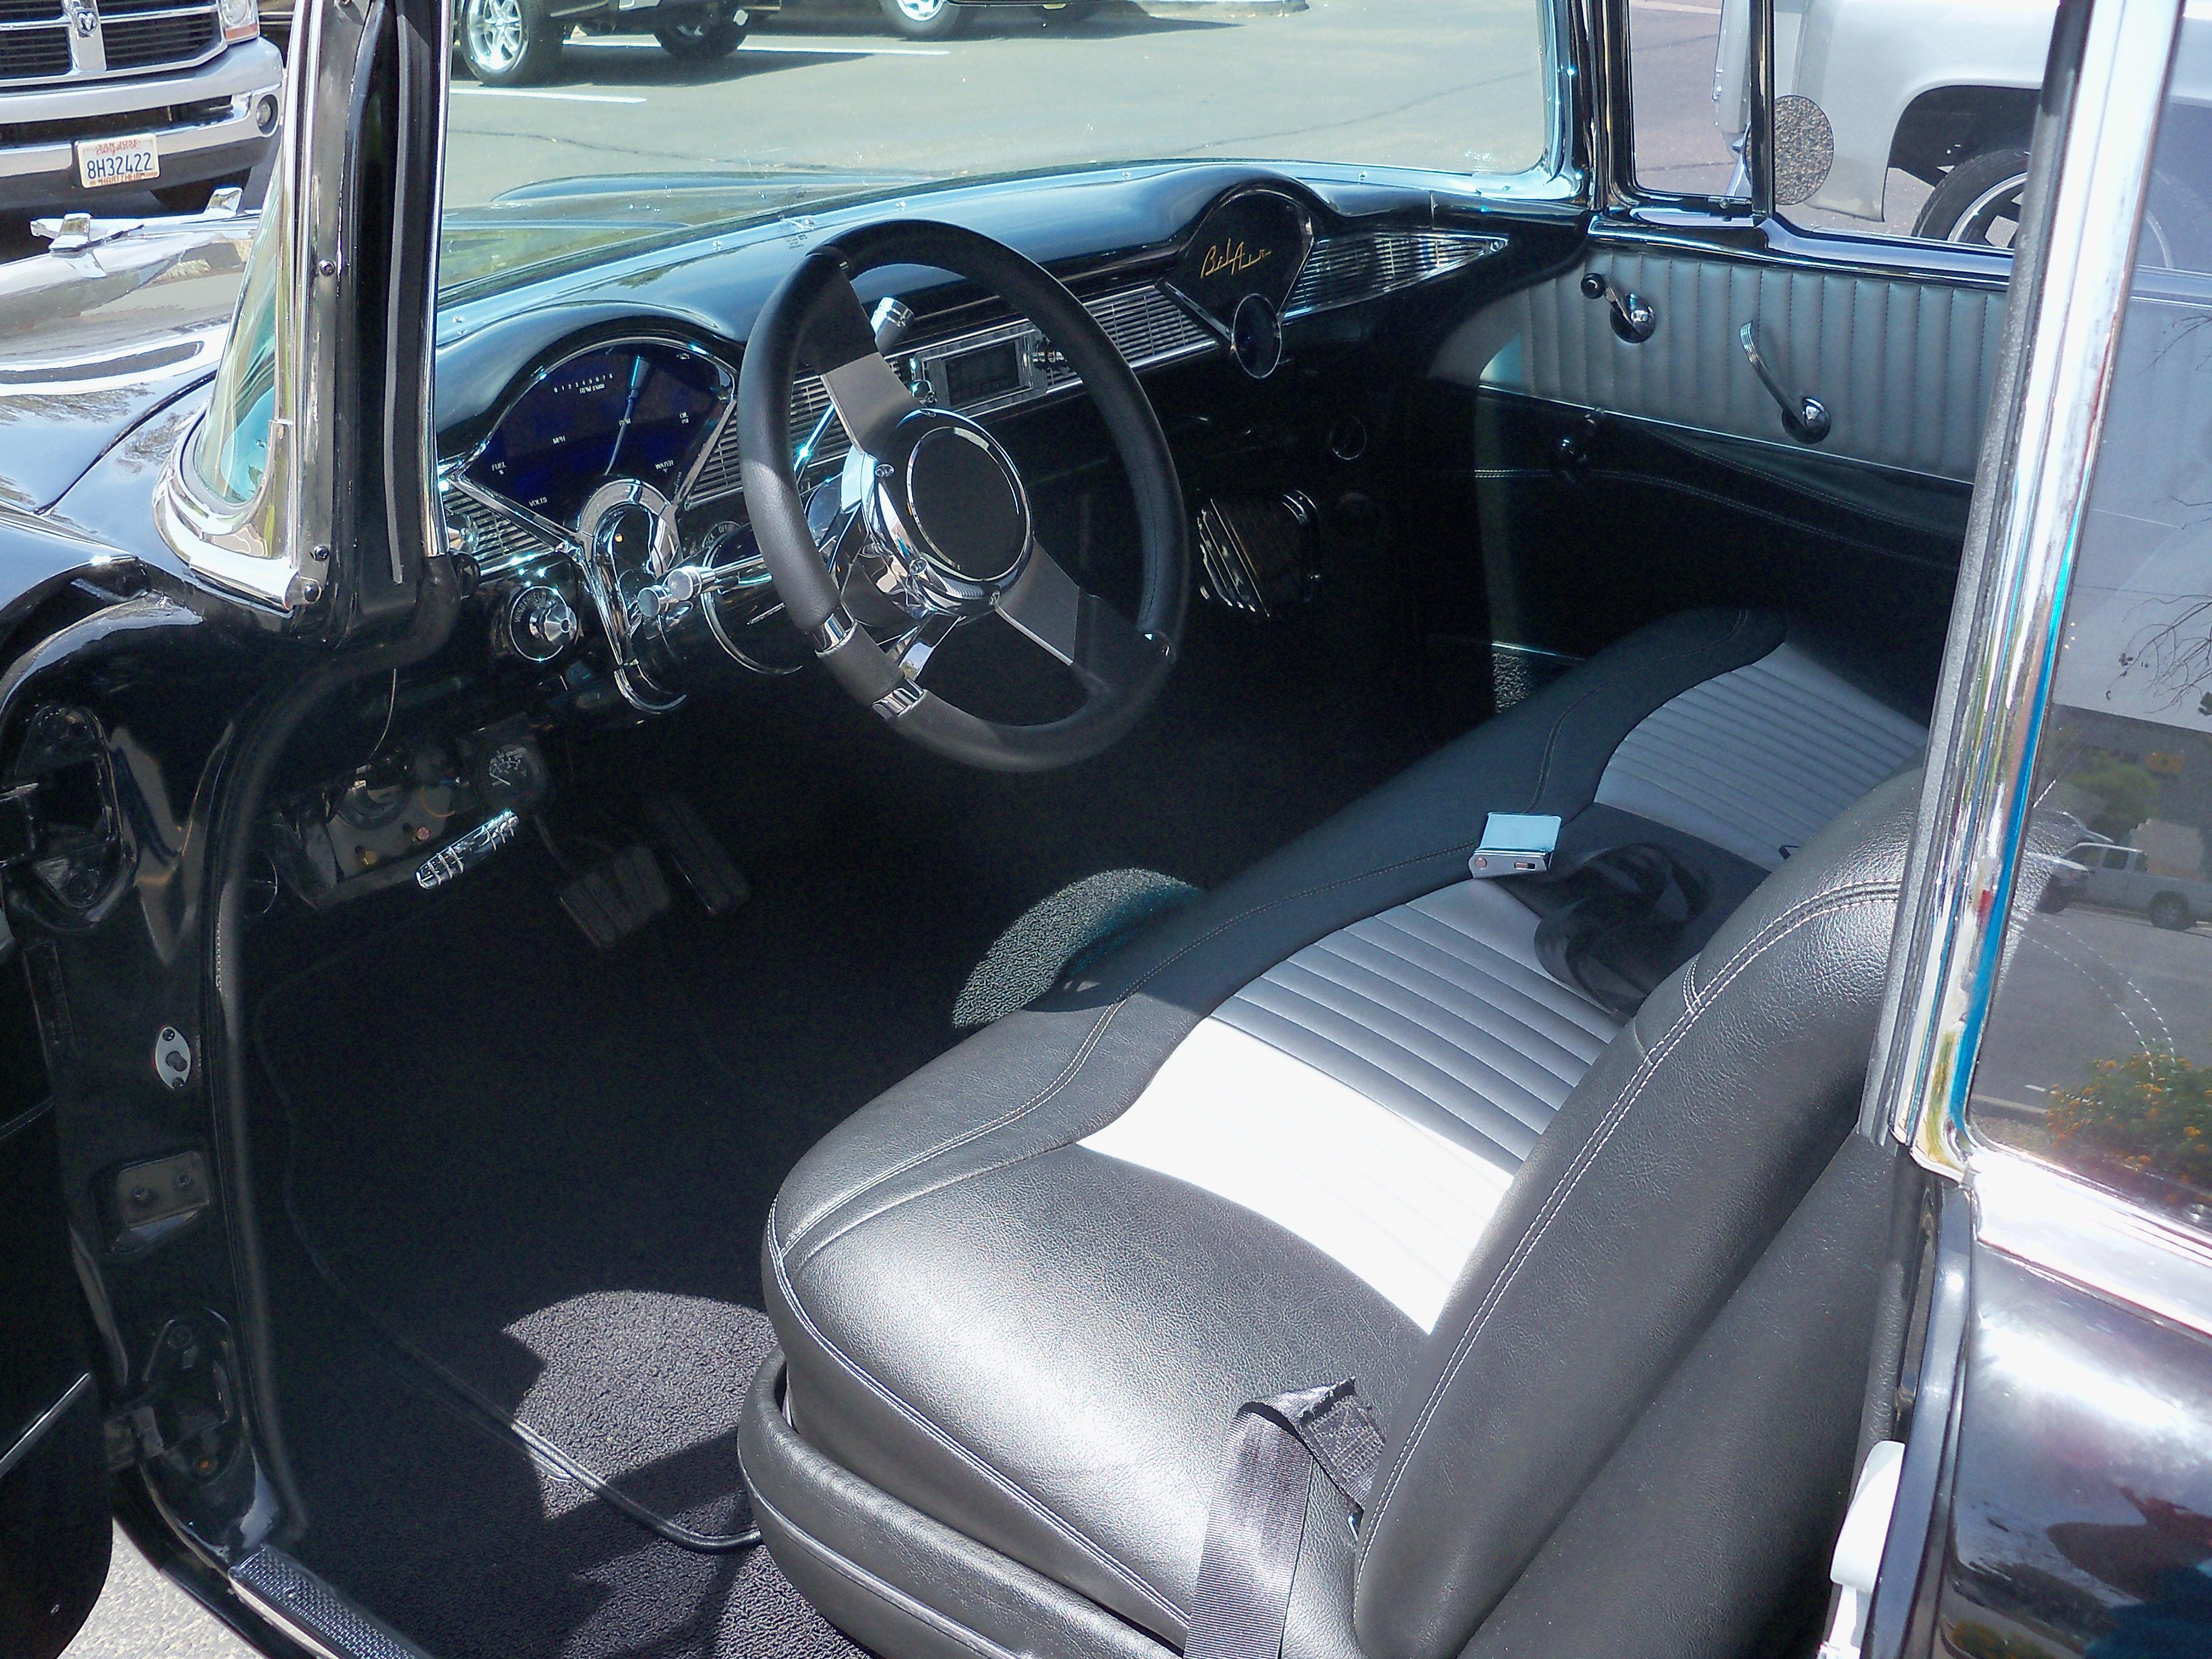 Auto Spa Upholstery Services Photo